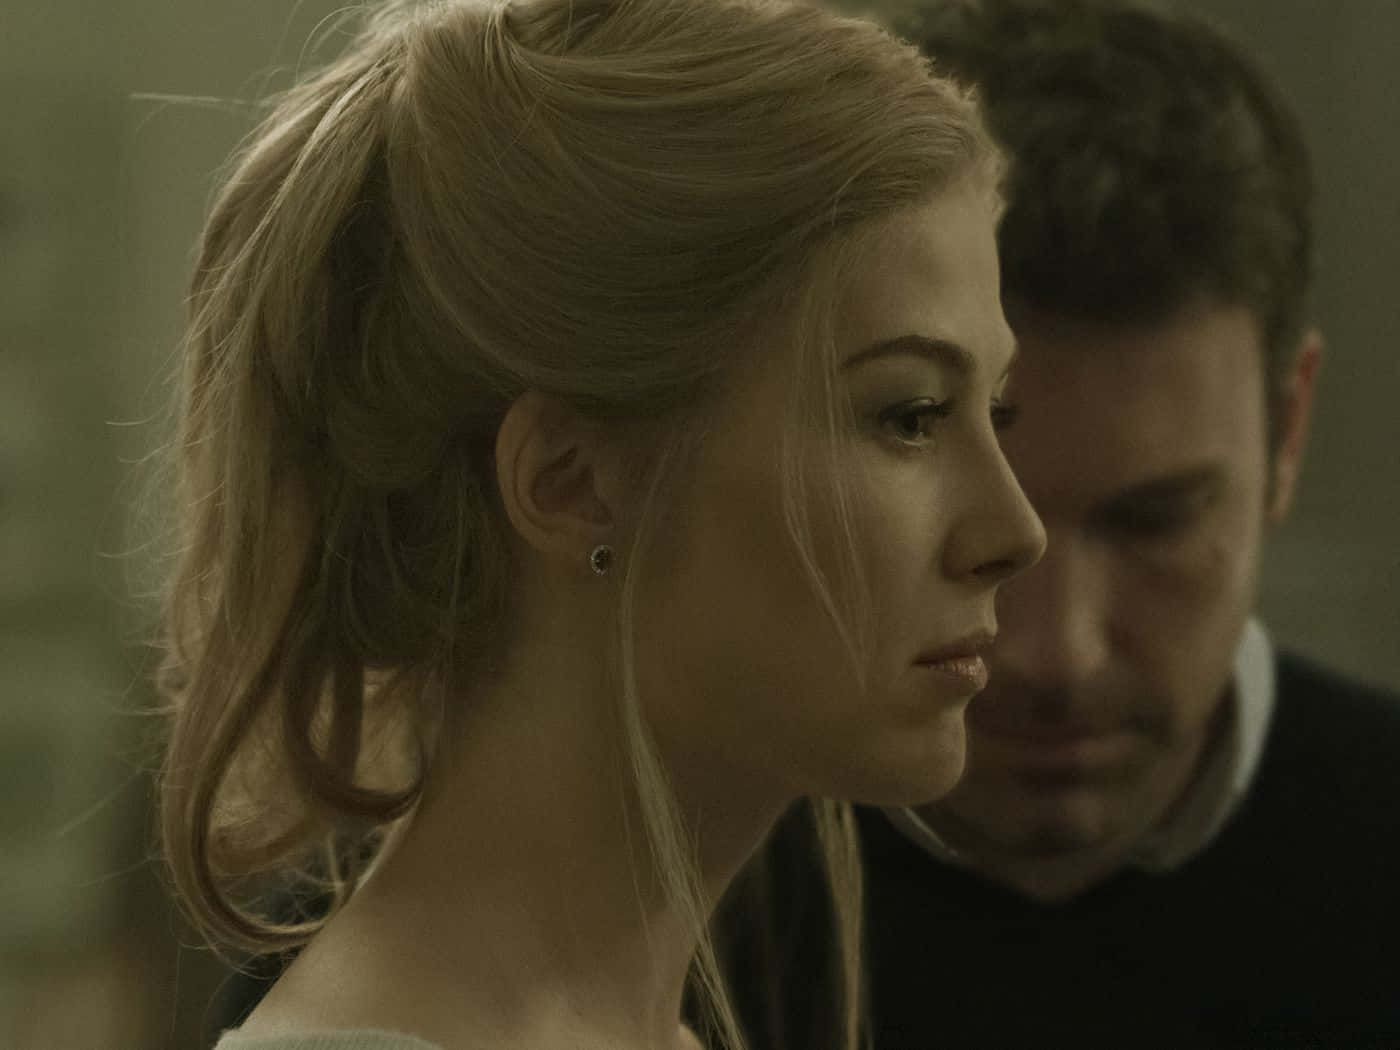 "enthralling Scene From The Movie, Gone Girl Featuring Ben Affleck." Wallpaper